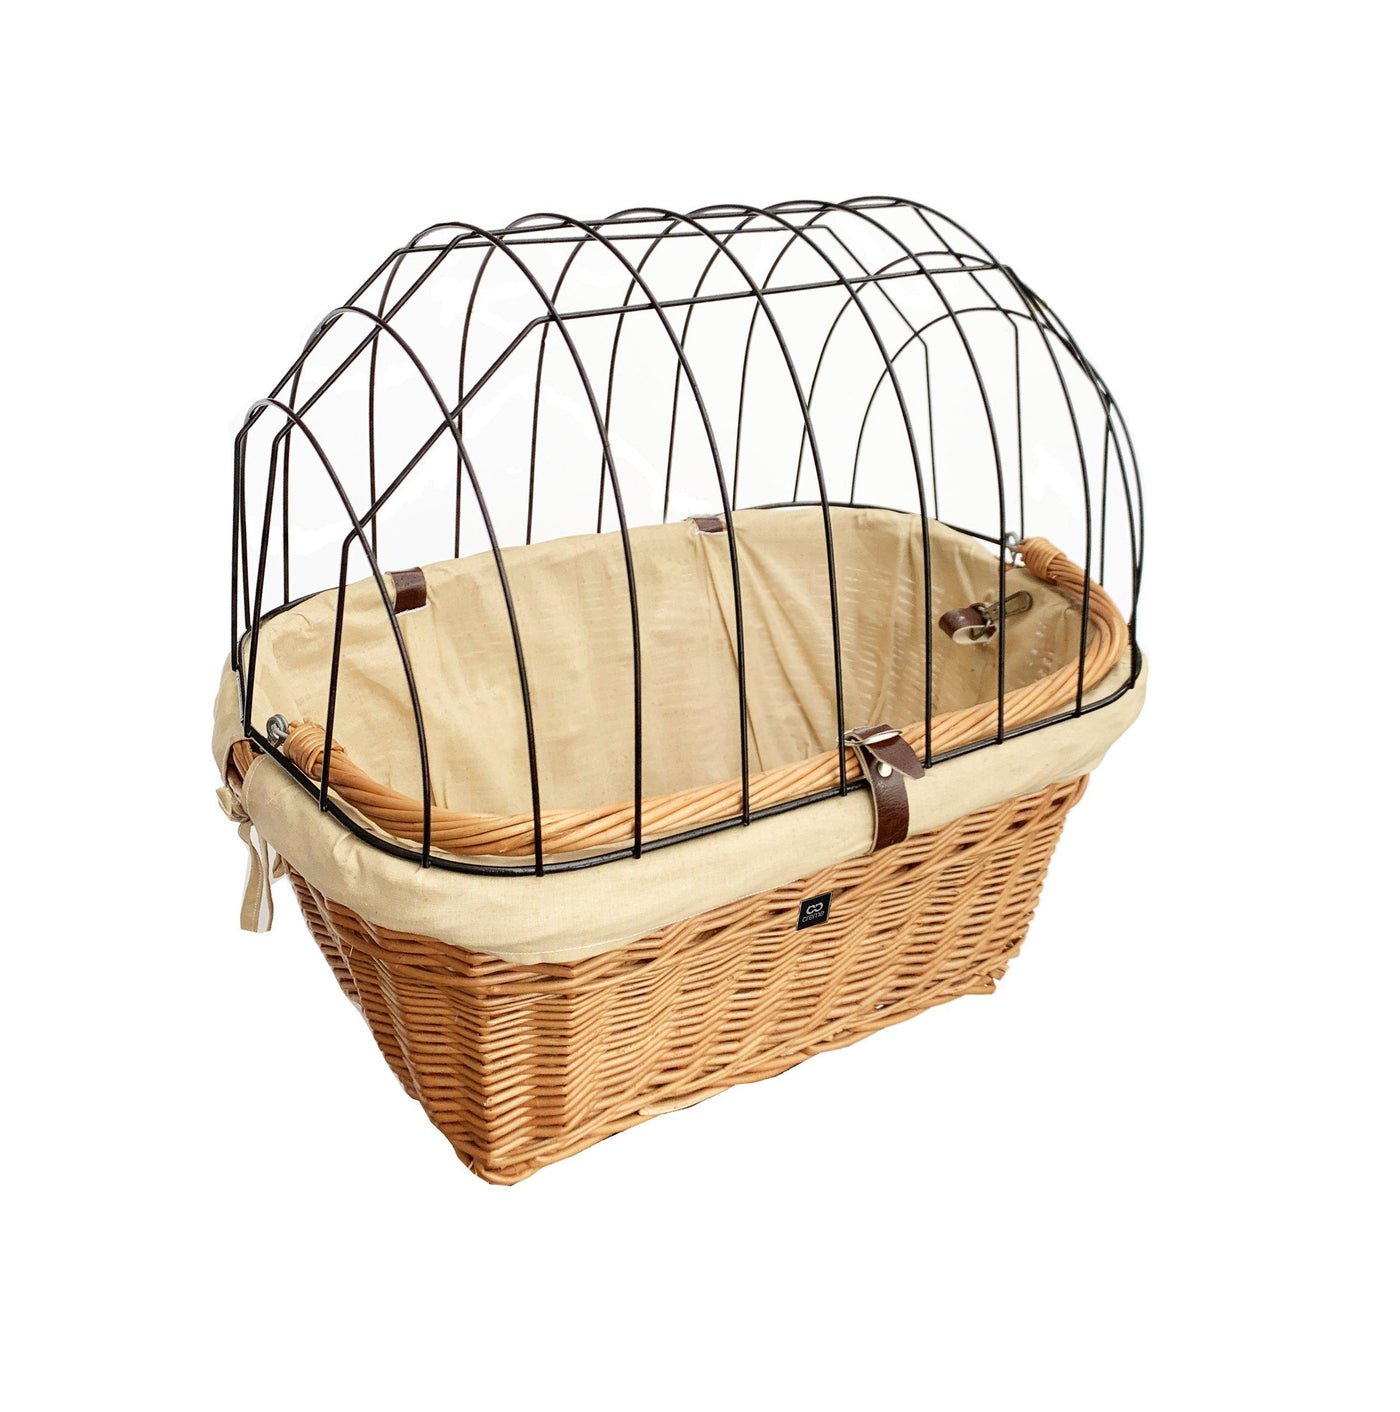 Creme Cycles Wicked Dog Bicycle Basket Wicker